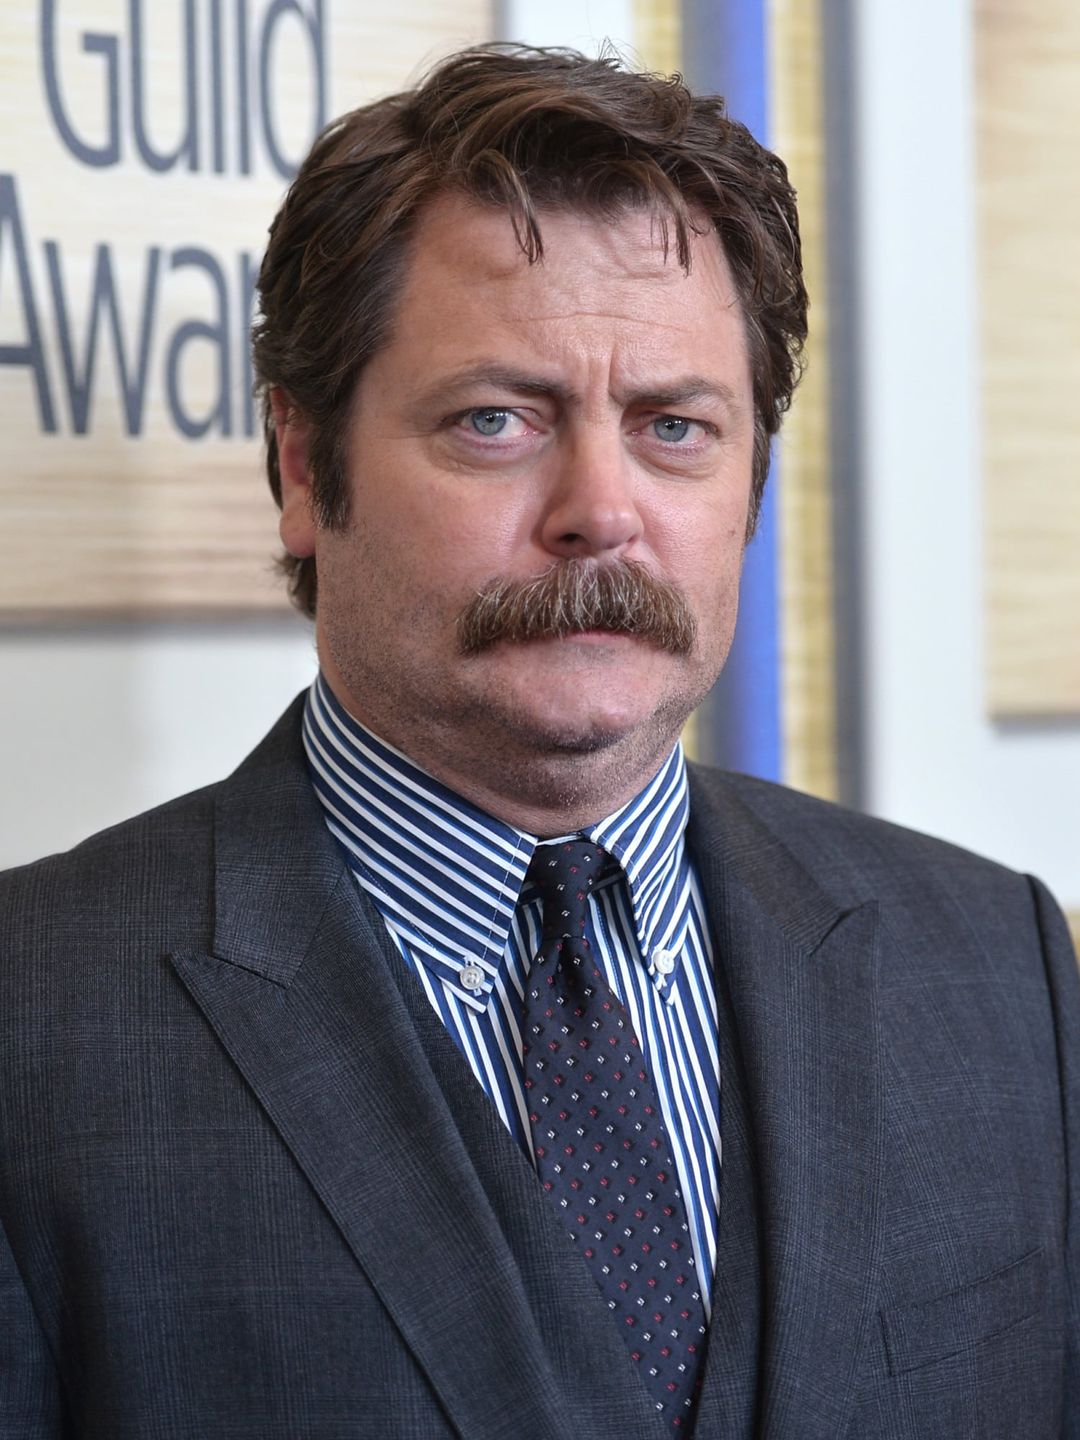 Nick Offerman story of success